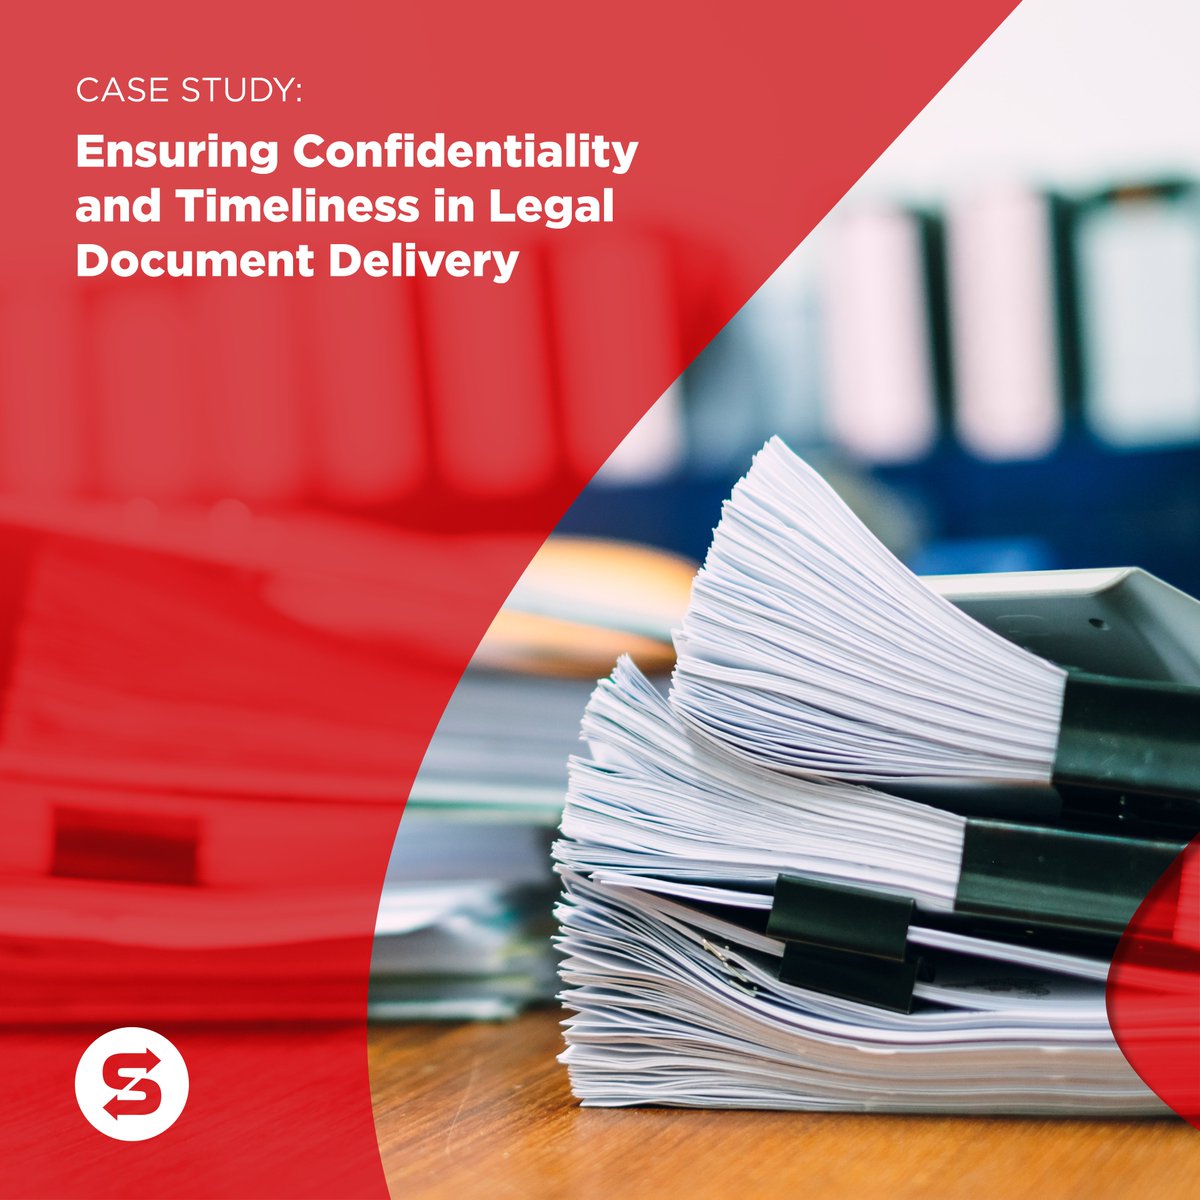 When a divorce and family law firm required urgent document delivery, they relied on our dedicated same day courier service to ensure their documents were securely delivered to the courthouse on time. ➡️ Find out more in our newest case study: hubs.la/Q02rPDfx0